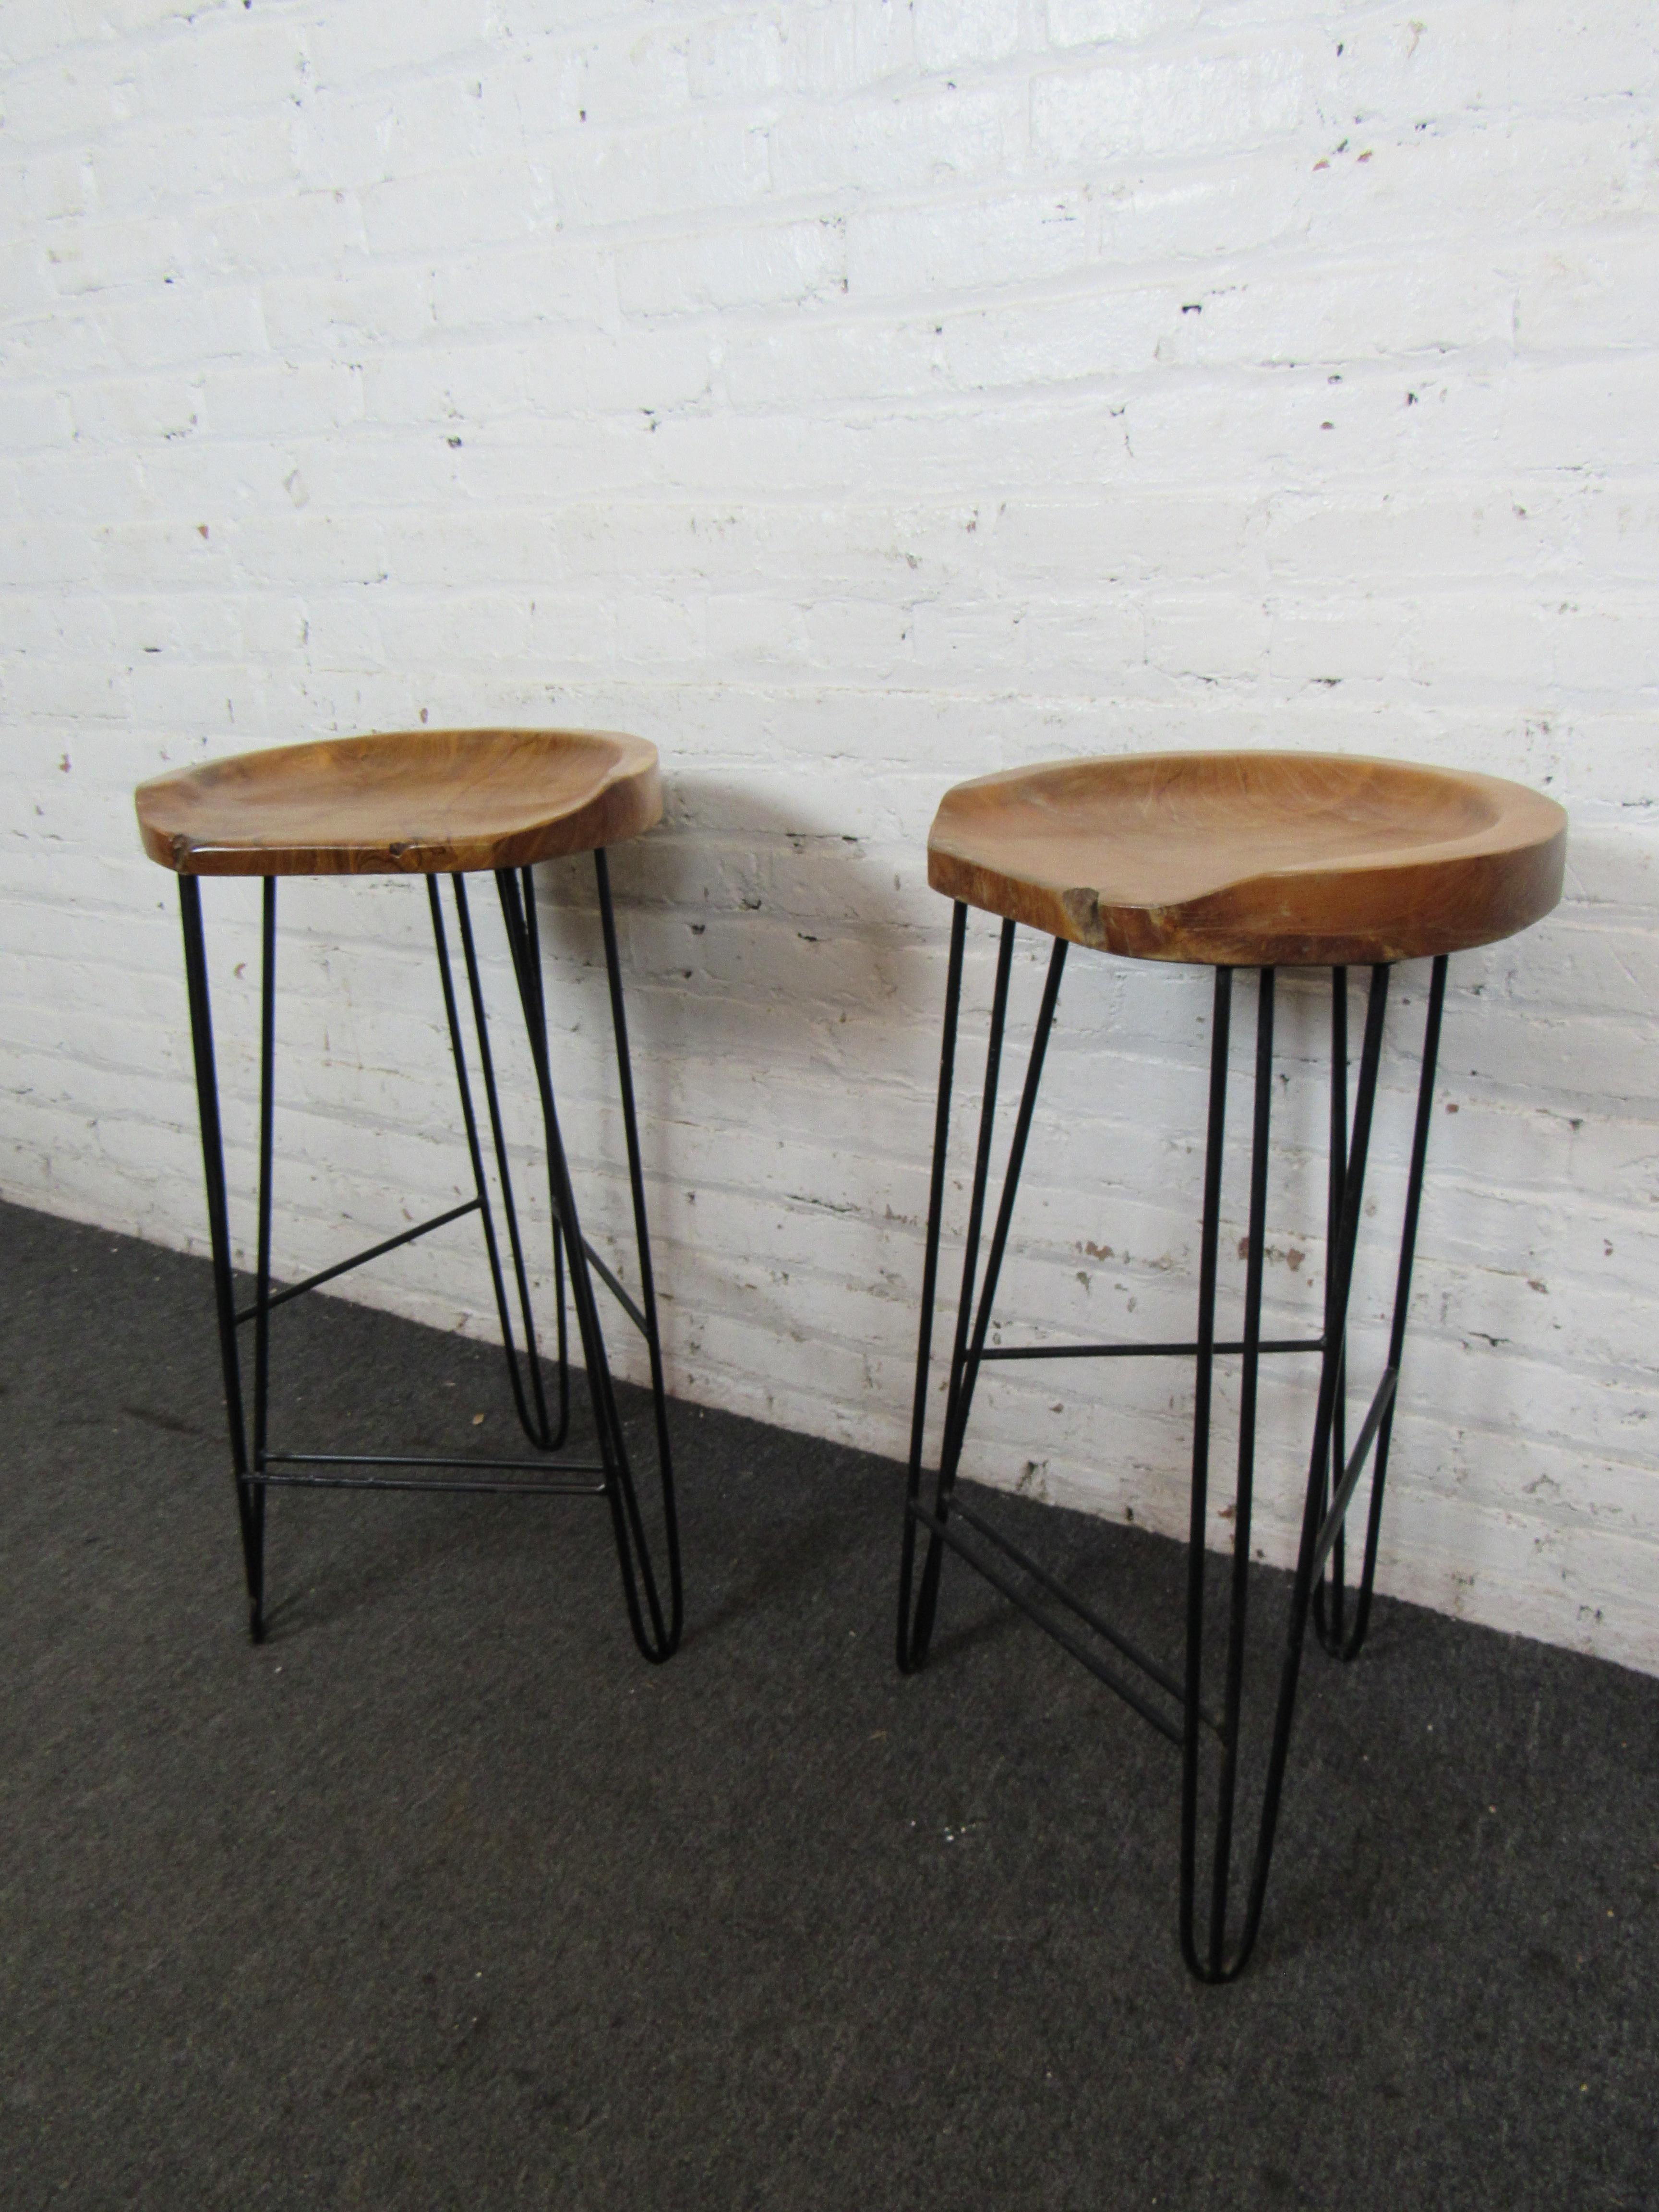 20th Century Vintage Bar Stools in Wood and Iron